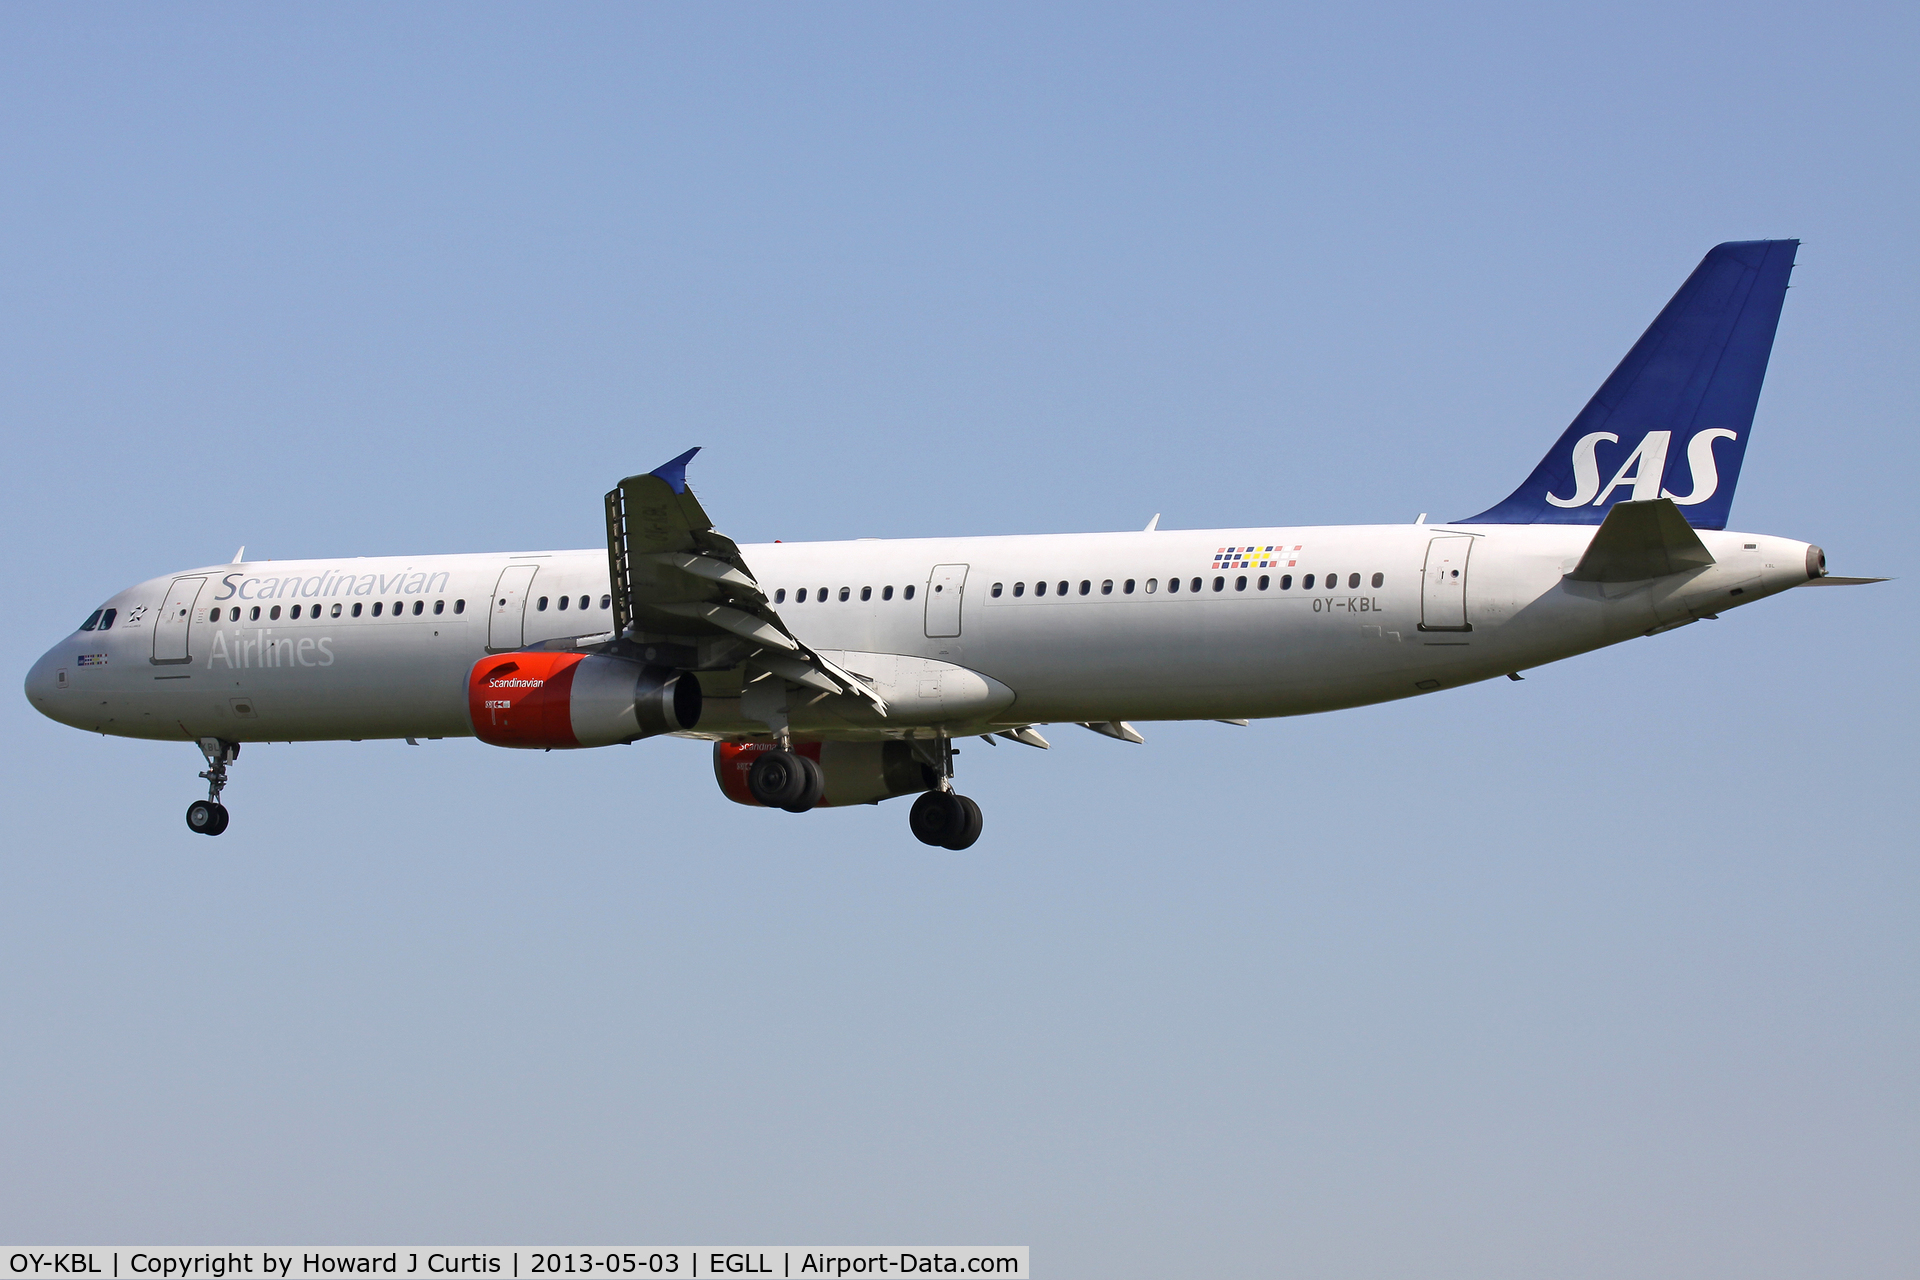 OY-KBL, 2001 Airbus A321-232 C/N 1619, SAS, on approach to runway 27L.